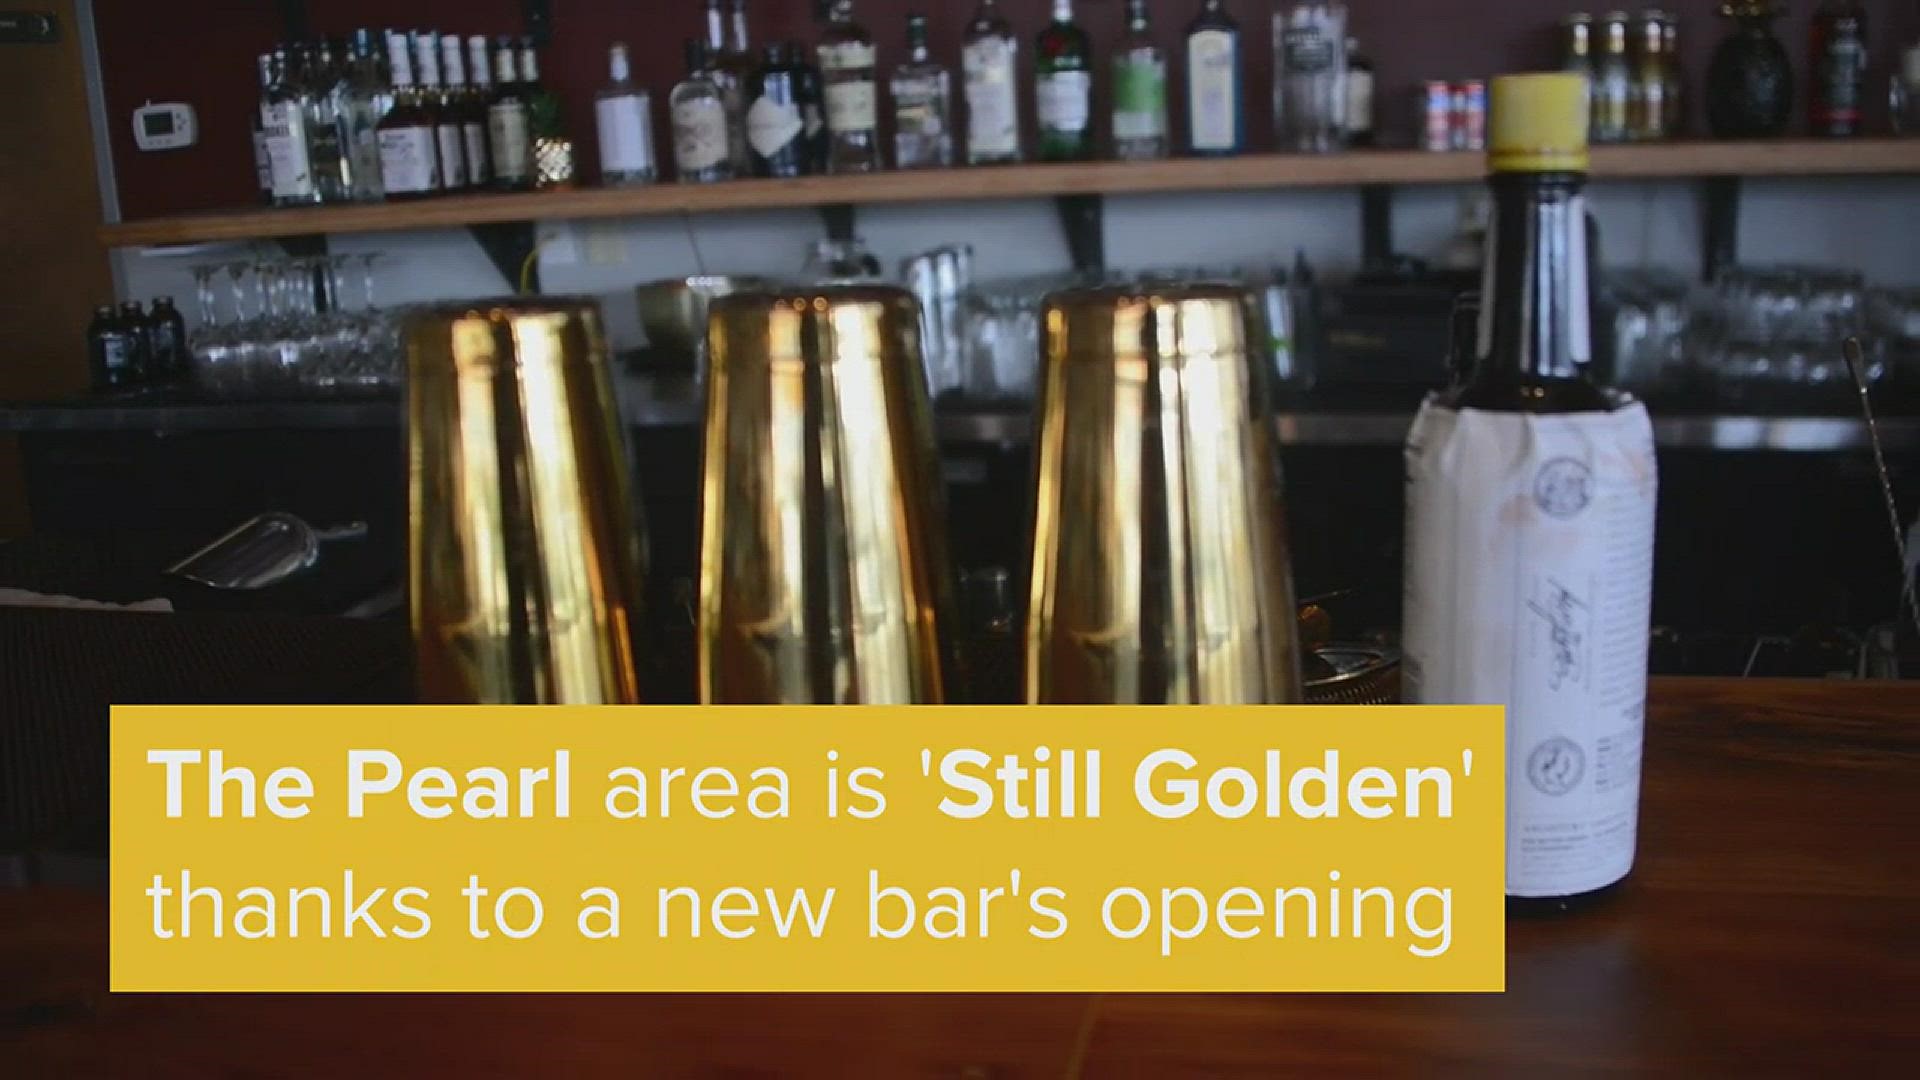 After Stay Golden was demolished due to re-development in the Pearl area, the latest re-imagining of the bar aims to bring a fun patio atmosphere to Broadway.